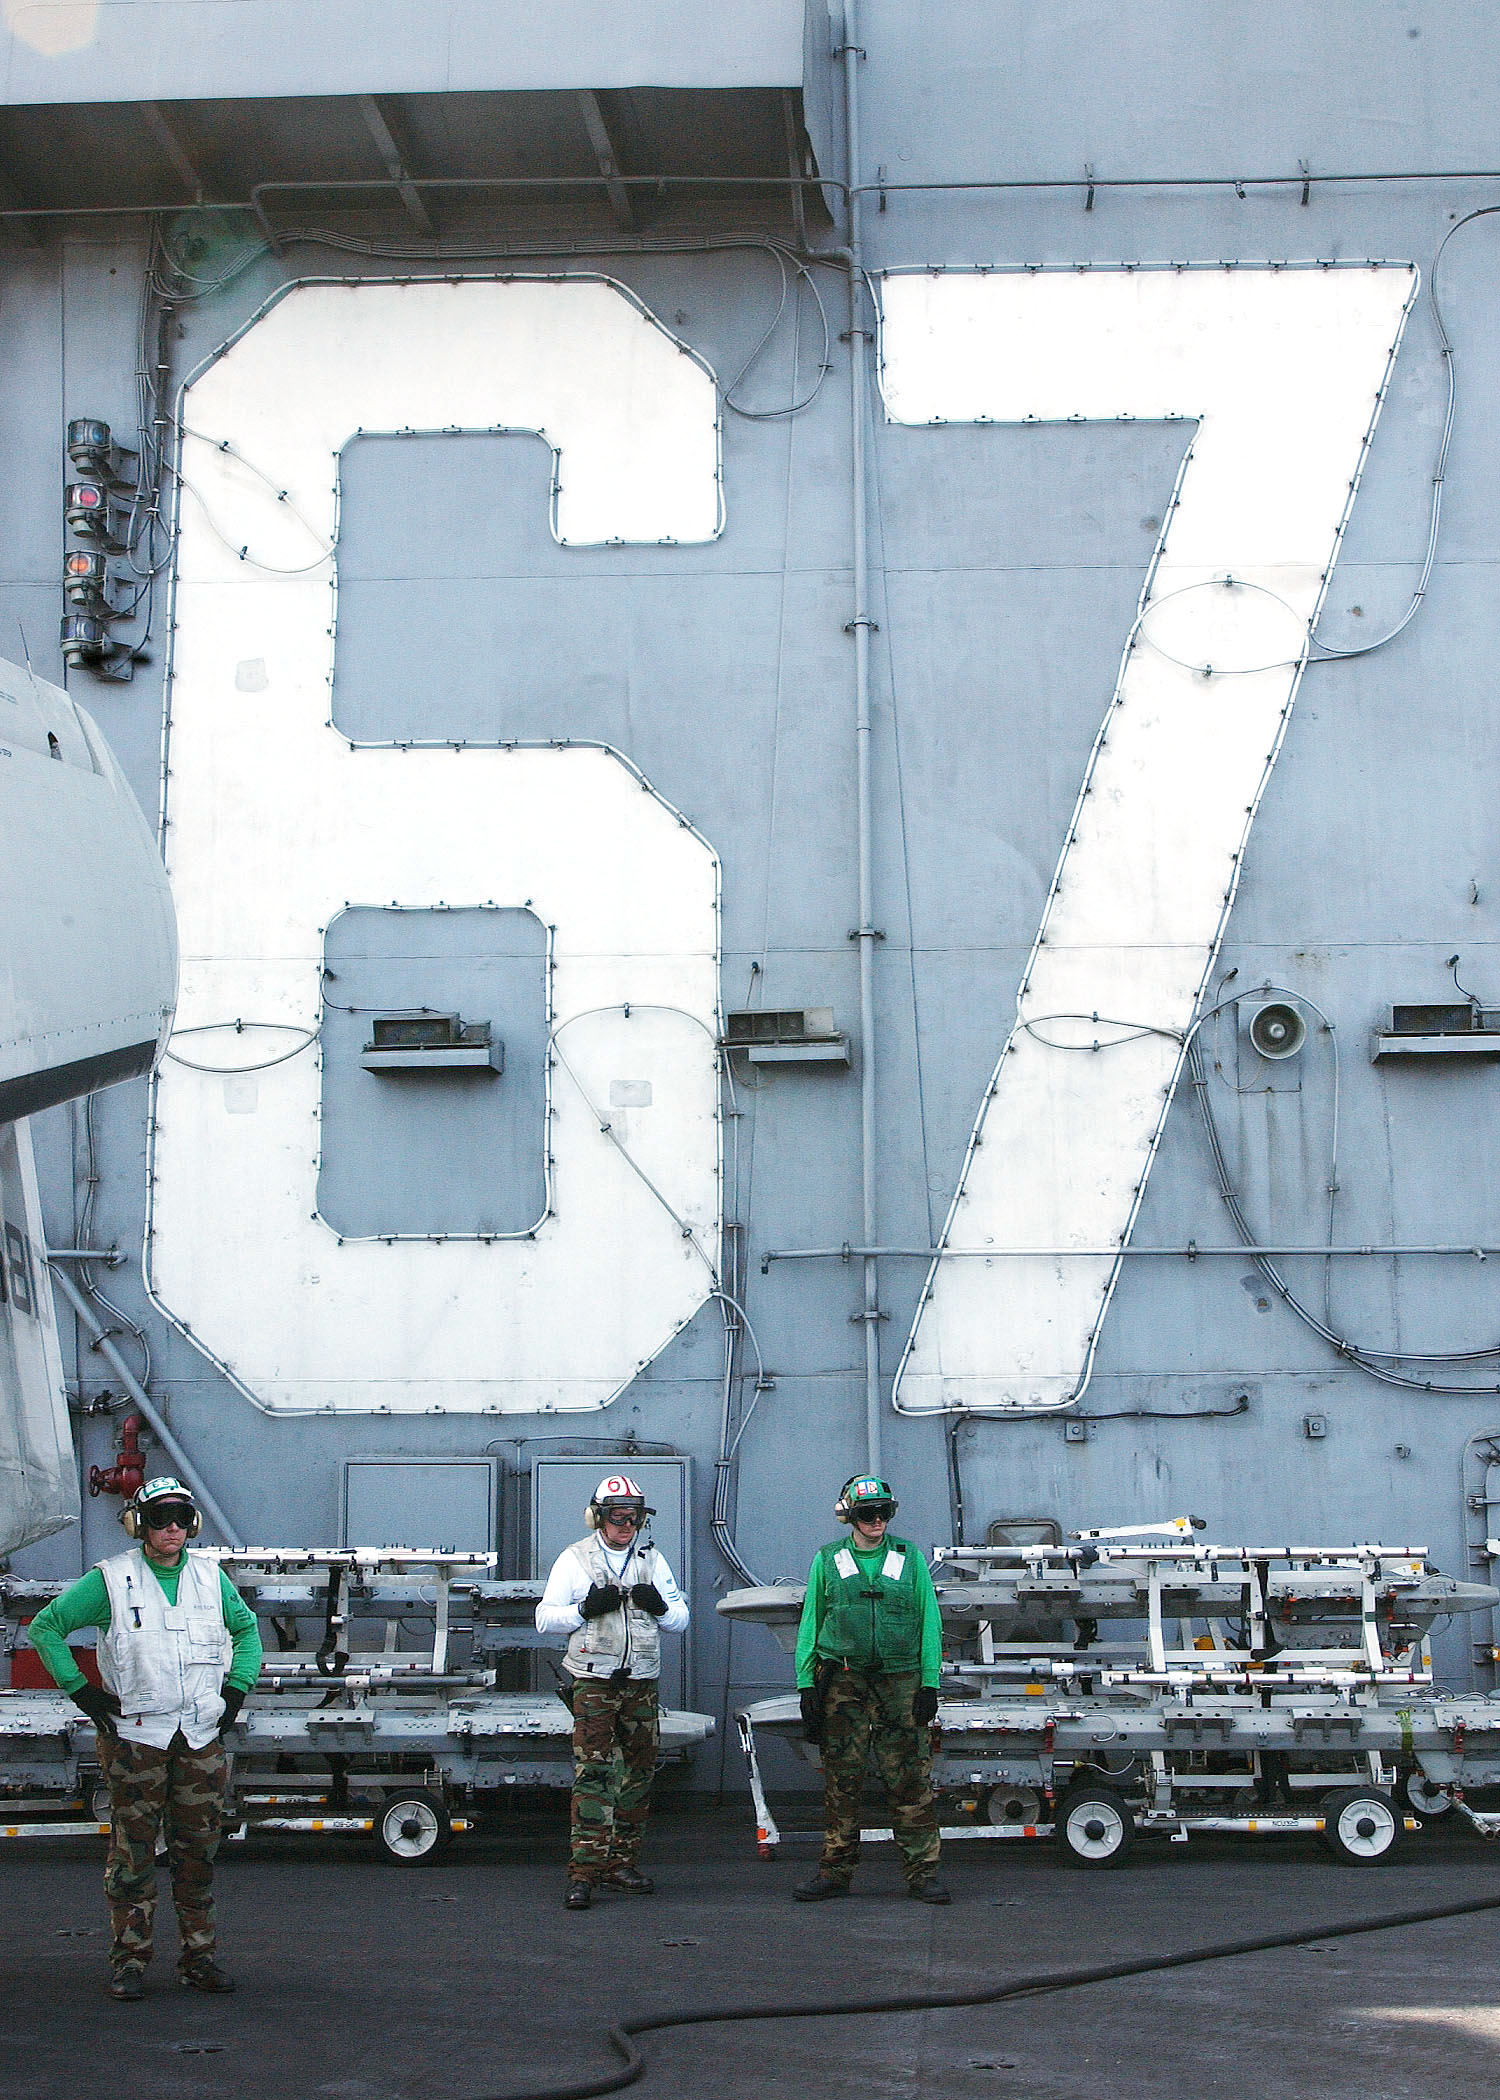 US Navy 040306-N-4374S-010 Sailors observe flight operations while standing in front of the island superstructure aboard the aircraft carrier John F. Kennedy